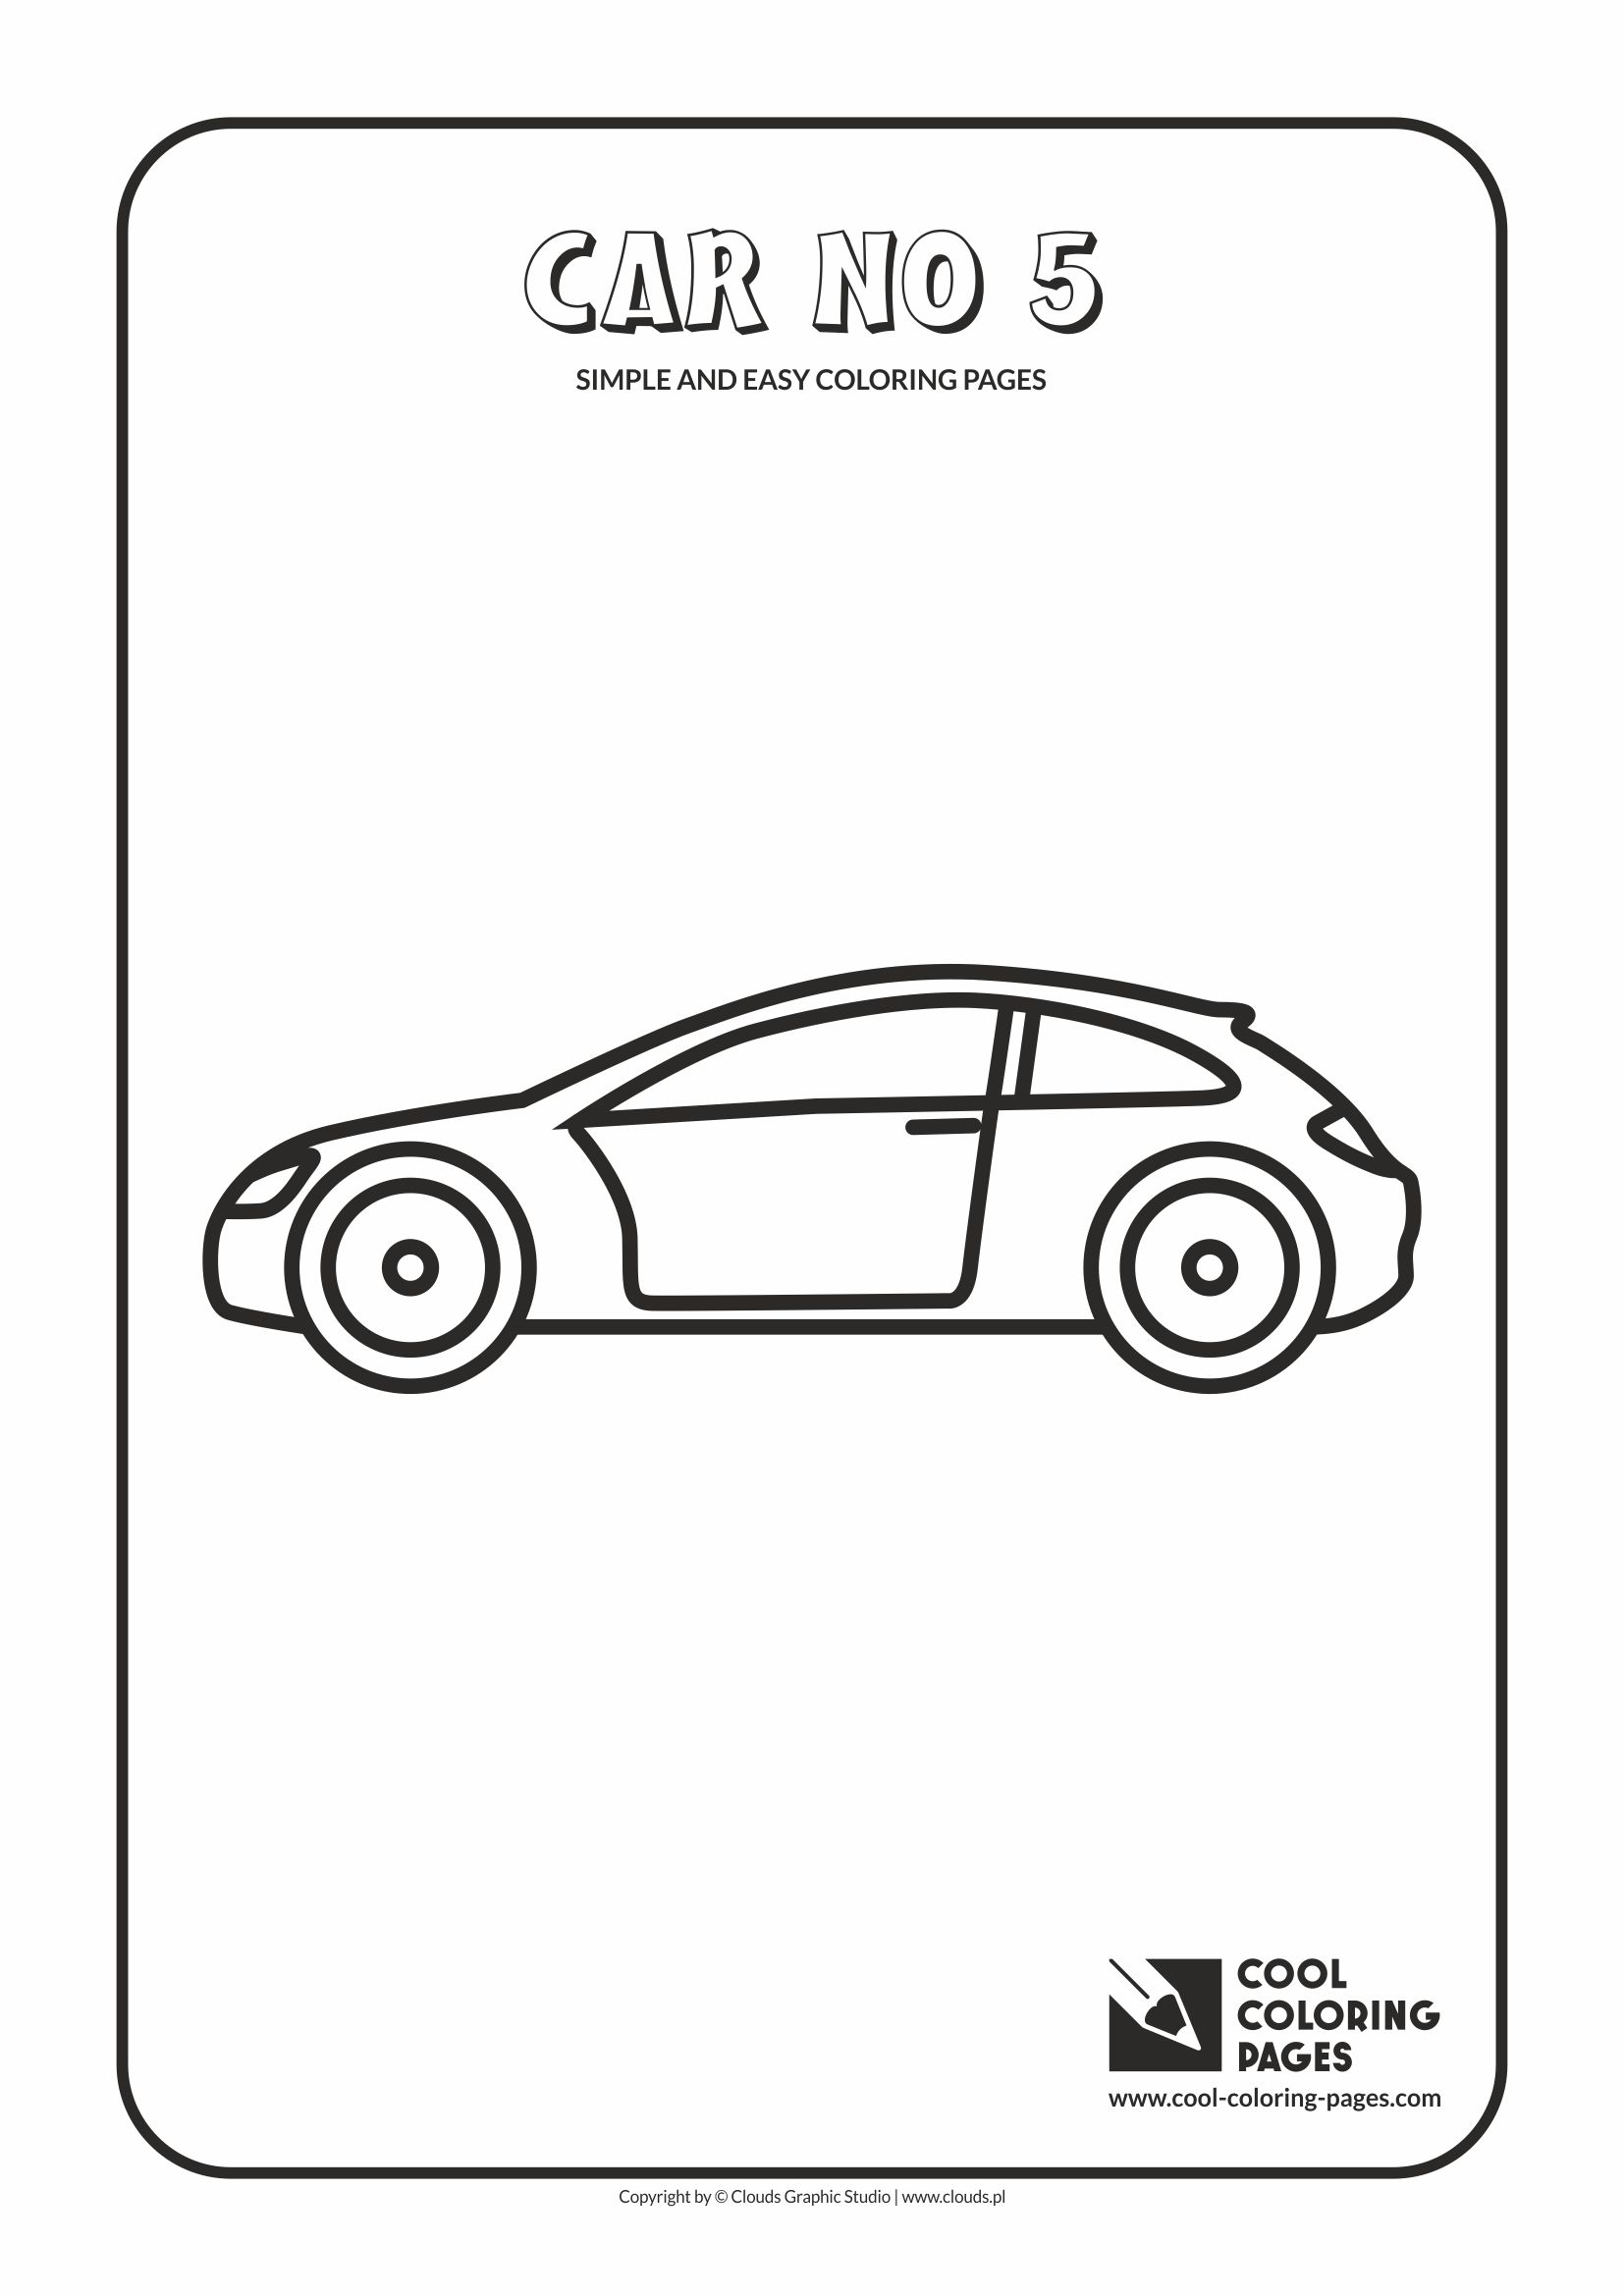 Simple and easy coloring pages for toddlers - Car no 5